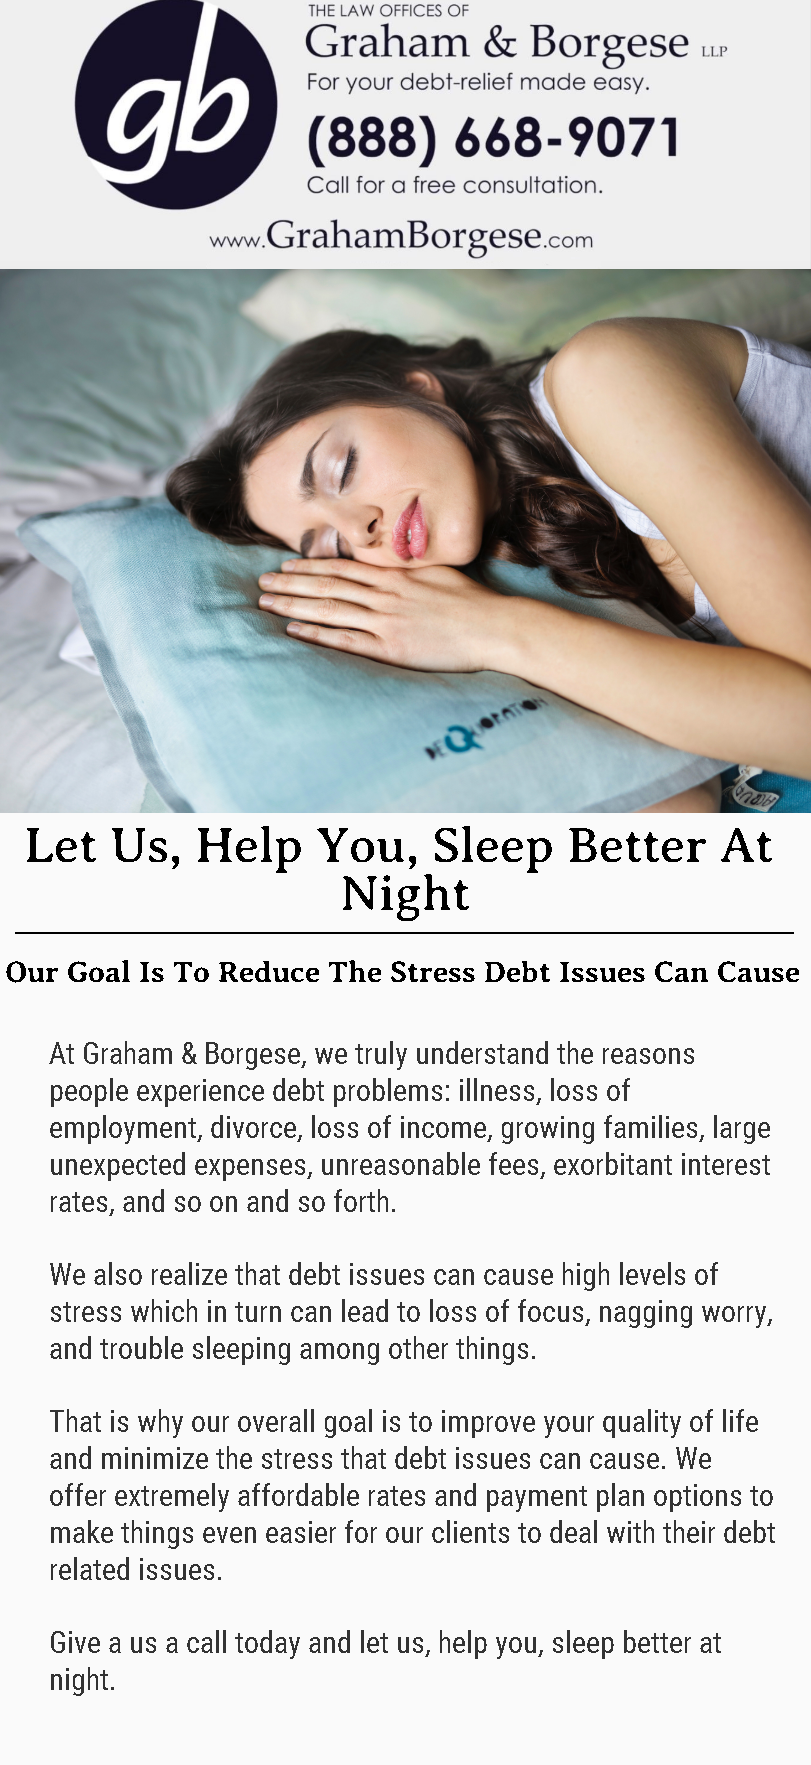 Let Us Reduce The Stress That Debt Issues Can Cause